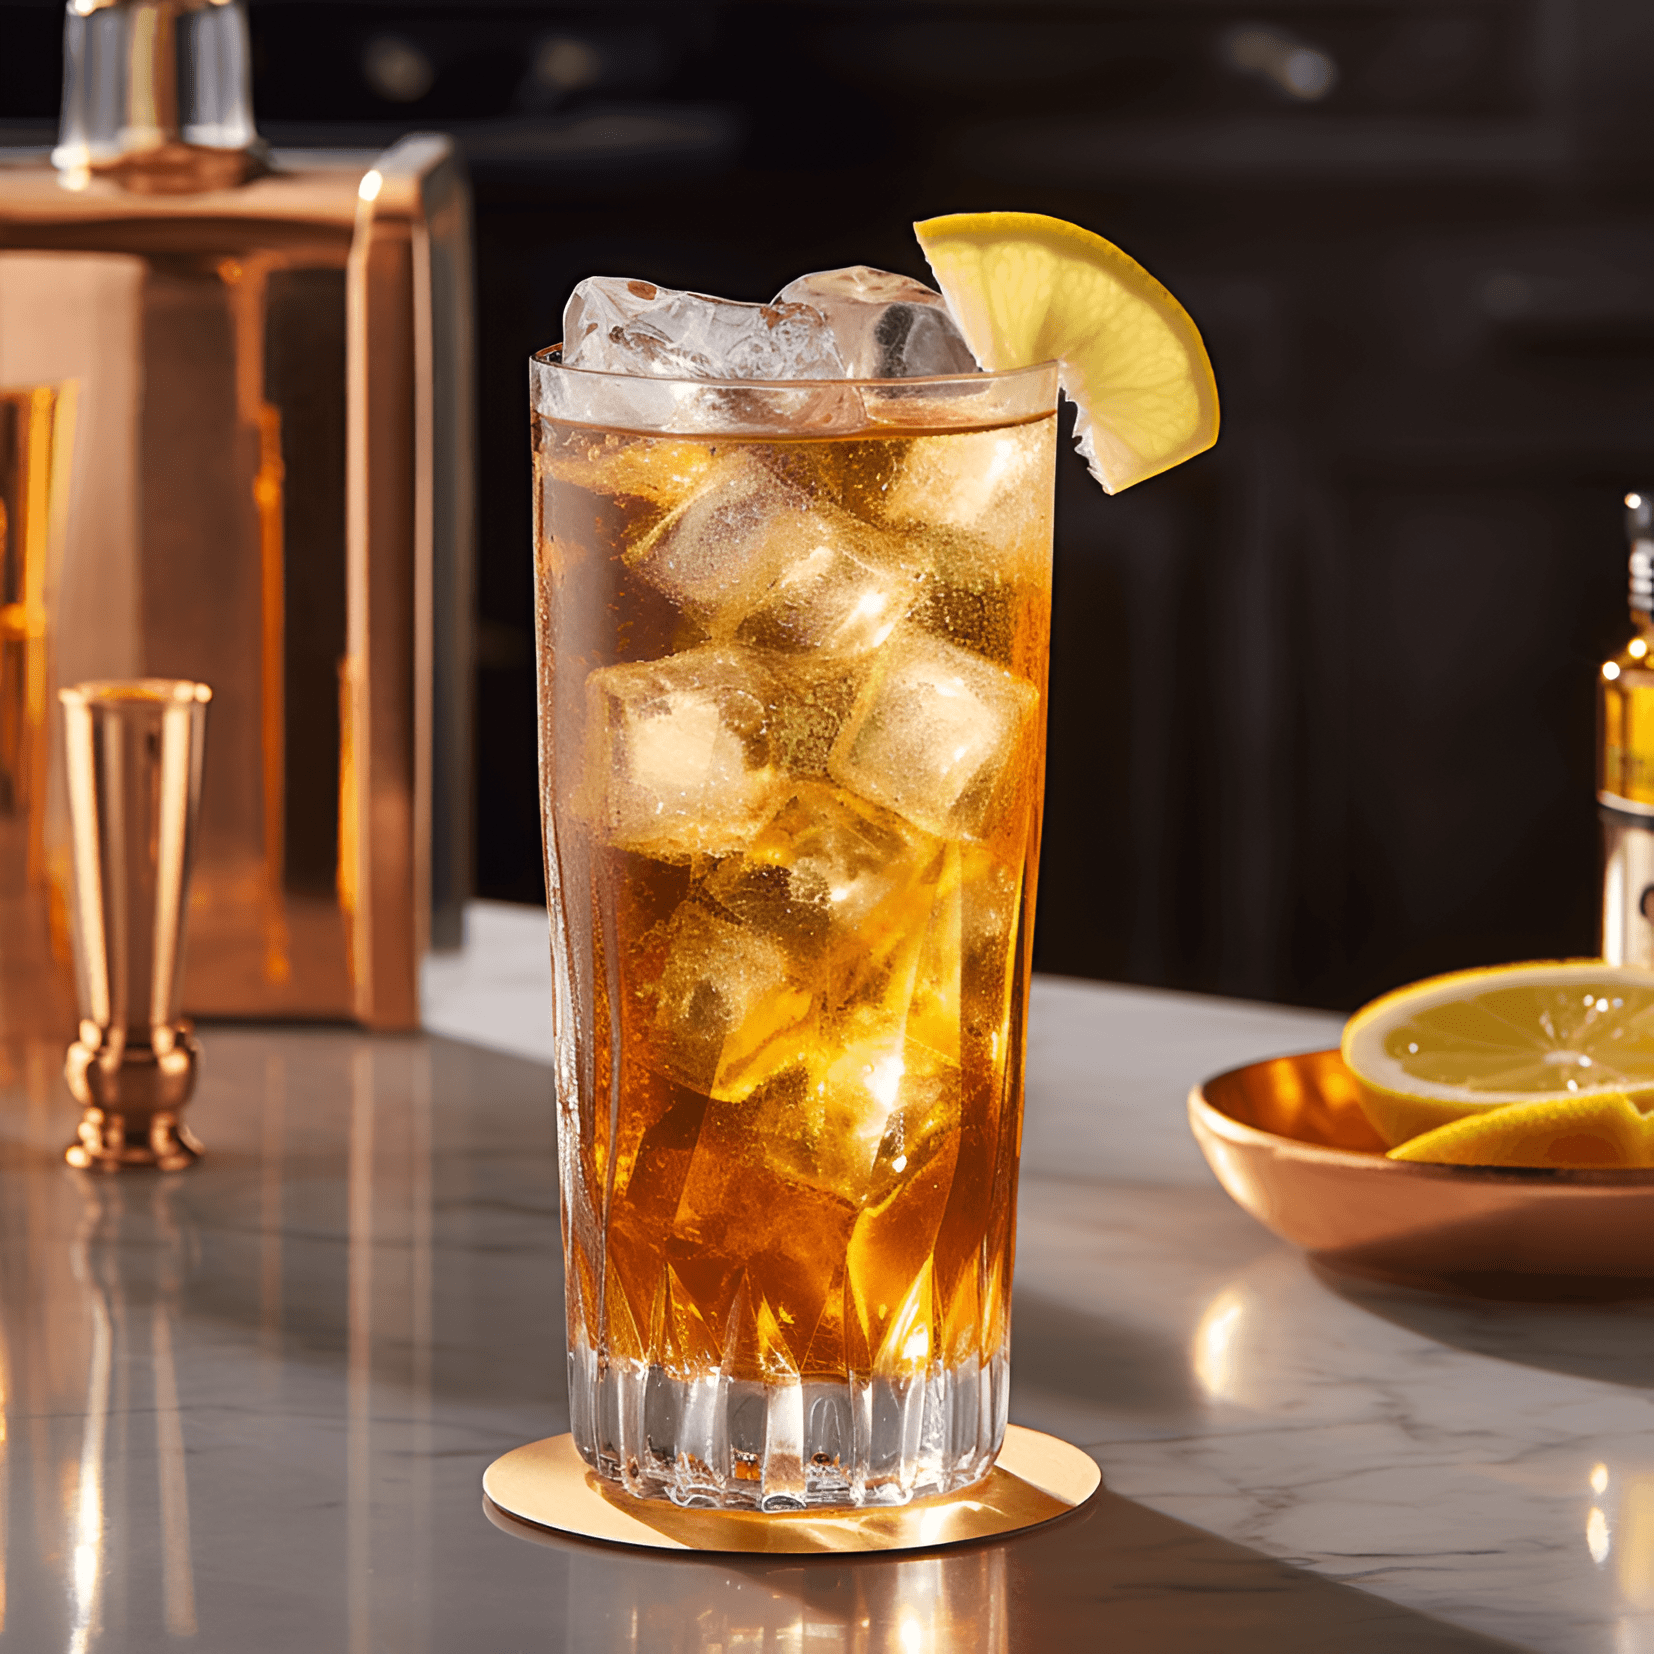 Scotch and Soda Cocktail Recipe | How to Make the perfect Scotch and Soda